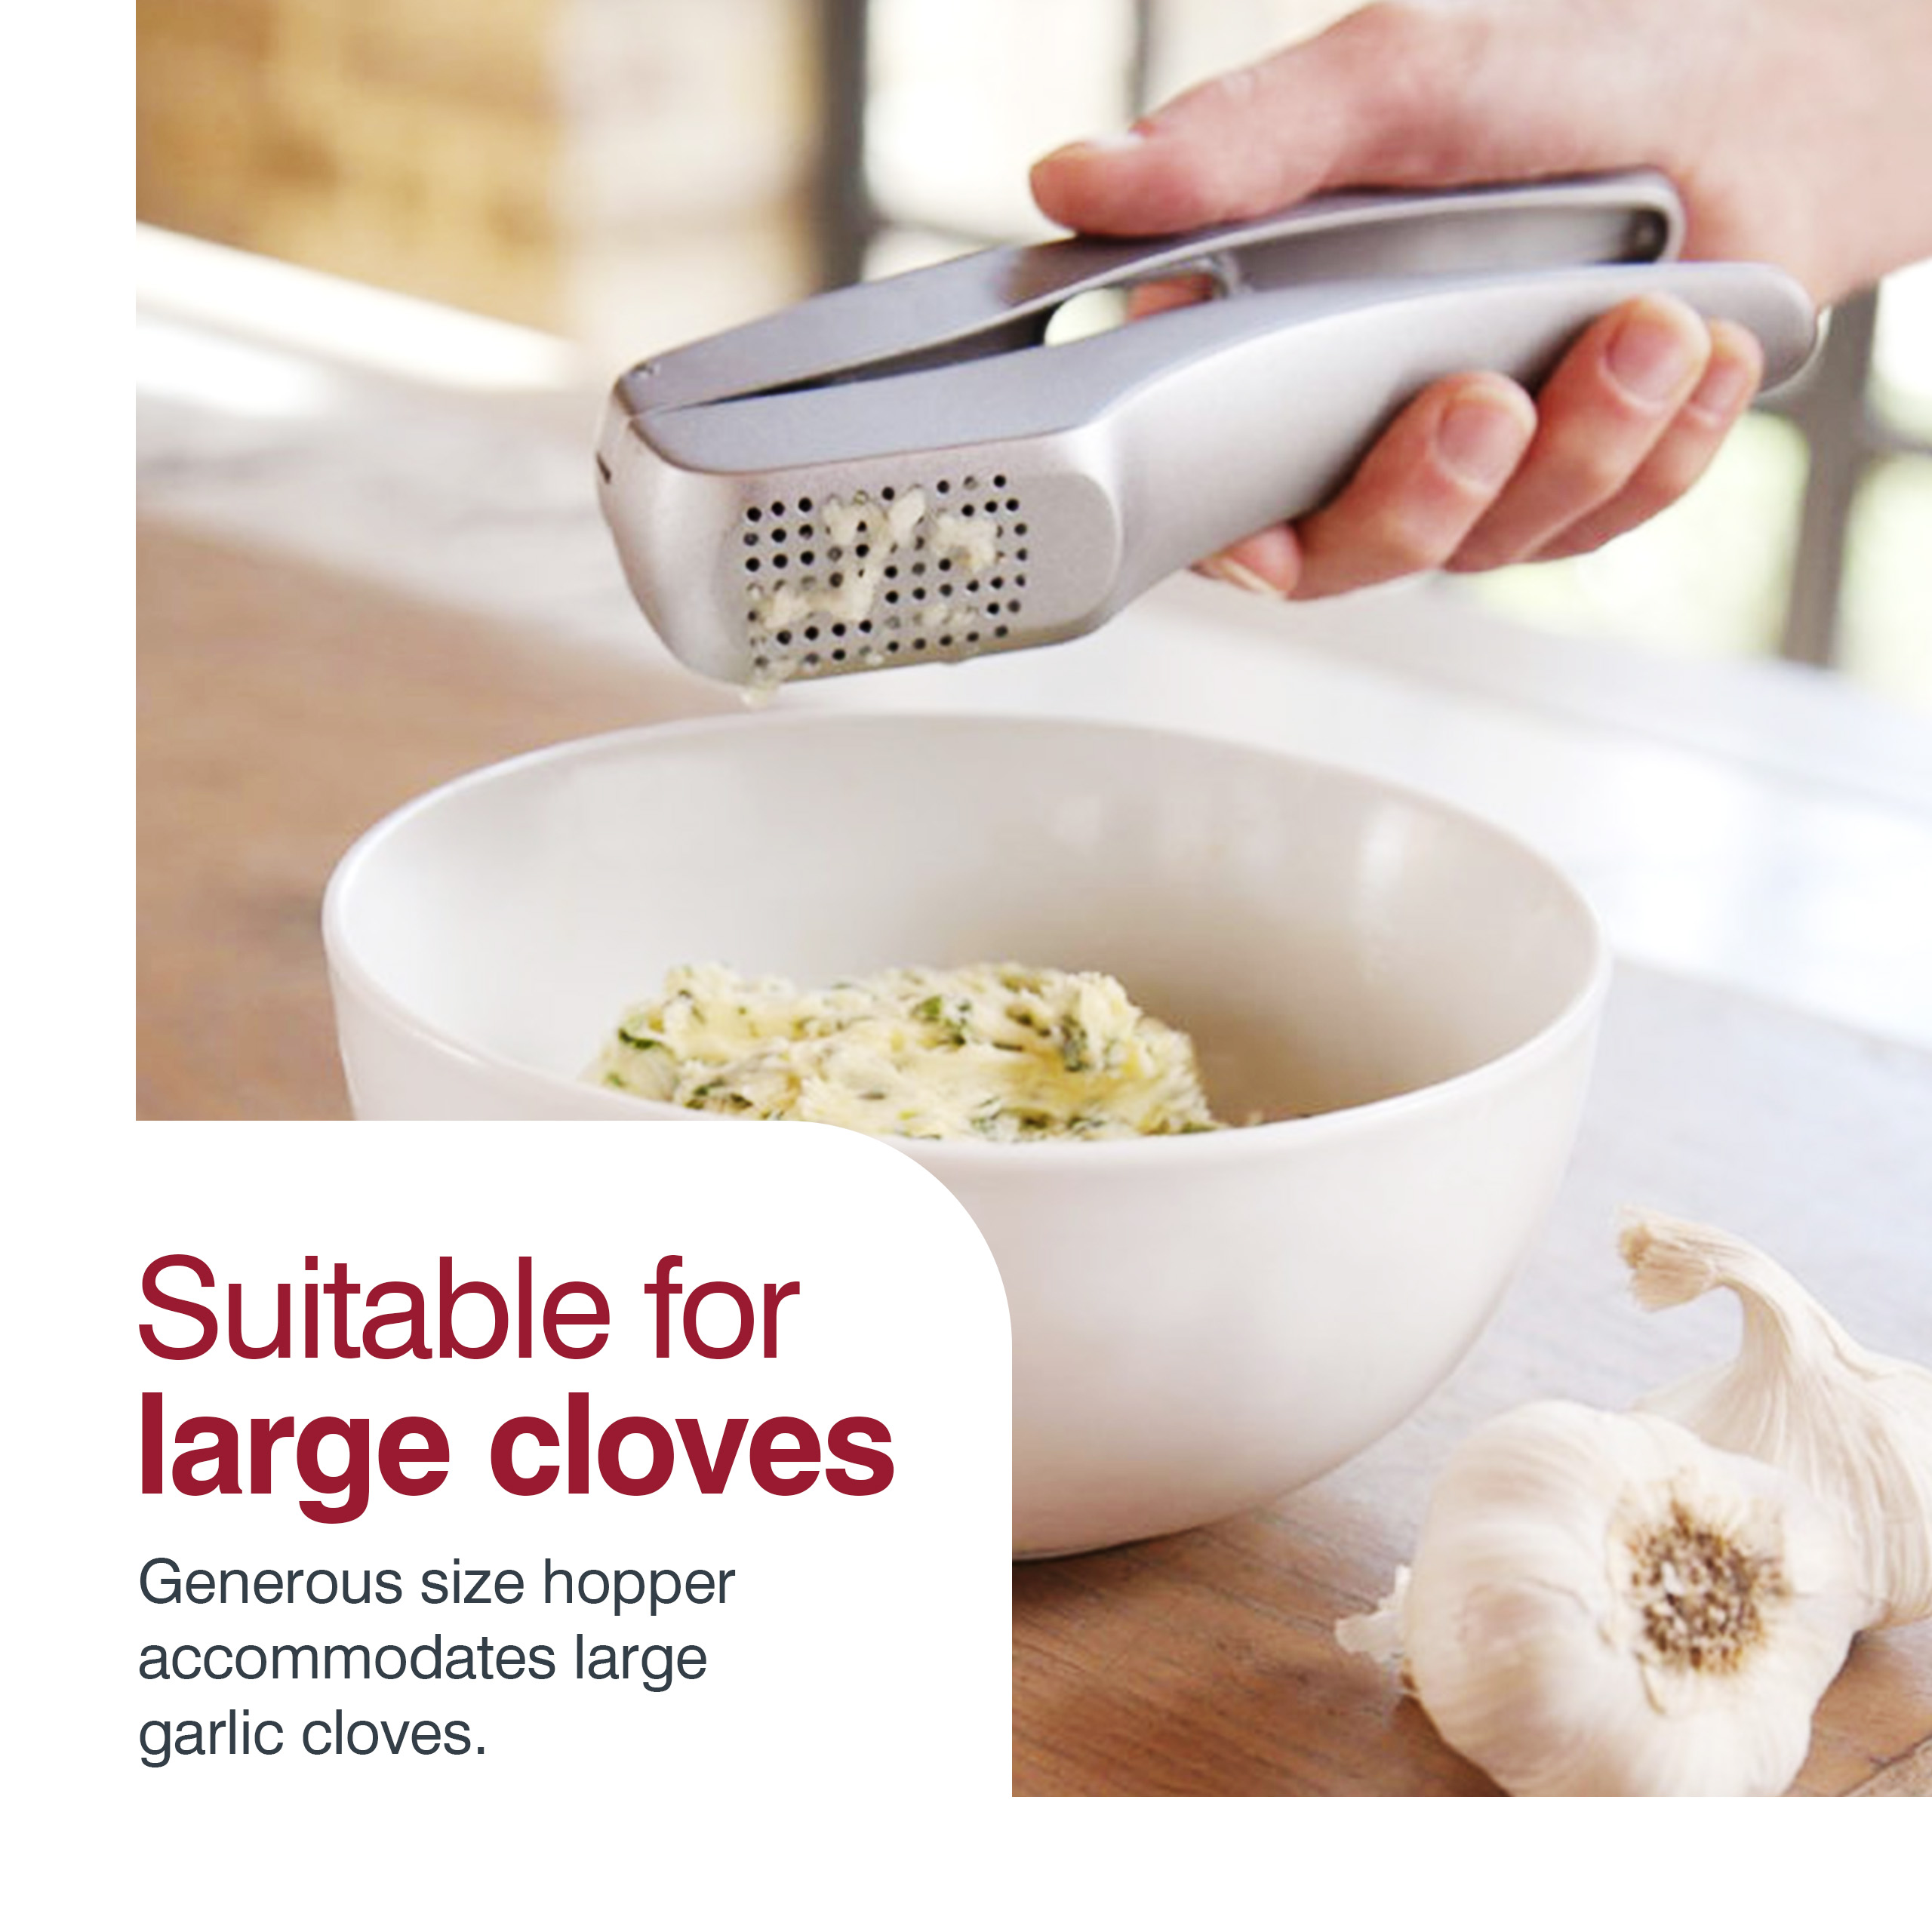 Zyliss Susi 3 Garlic Press Built in Cleaner - Crush, Mince and Peeler, Silver Aluminum Dishwasher Safe - image 3 of 7